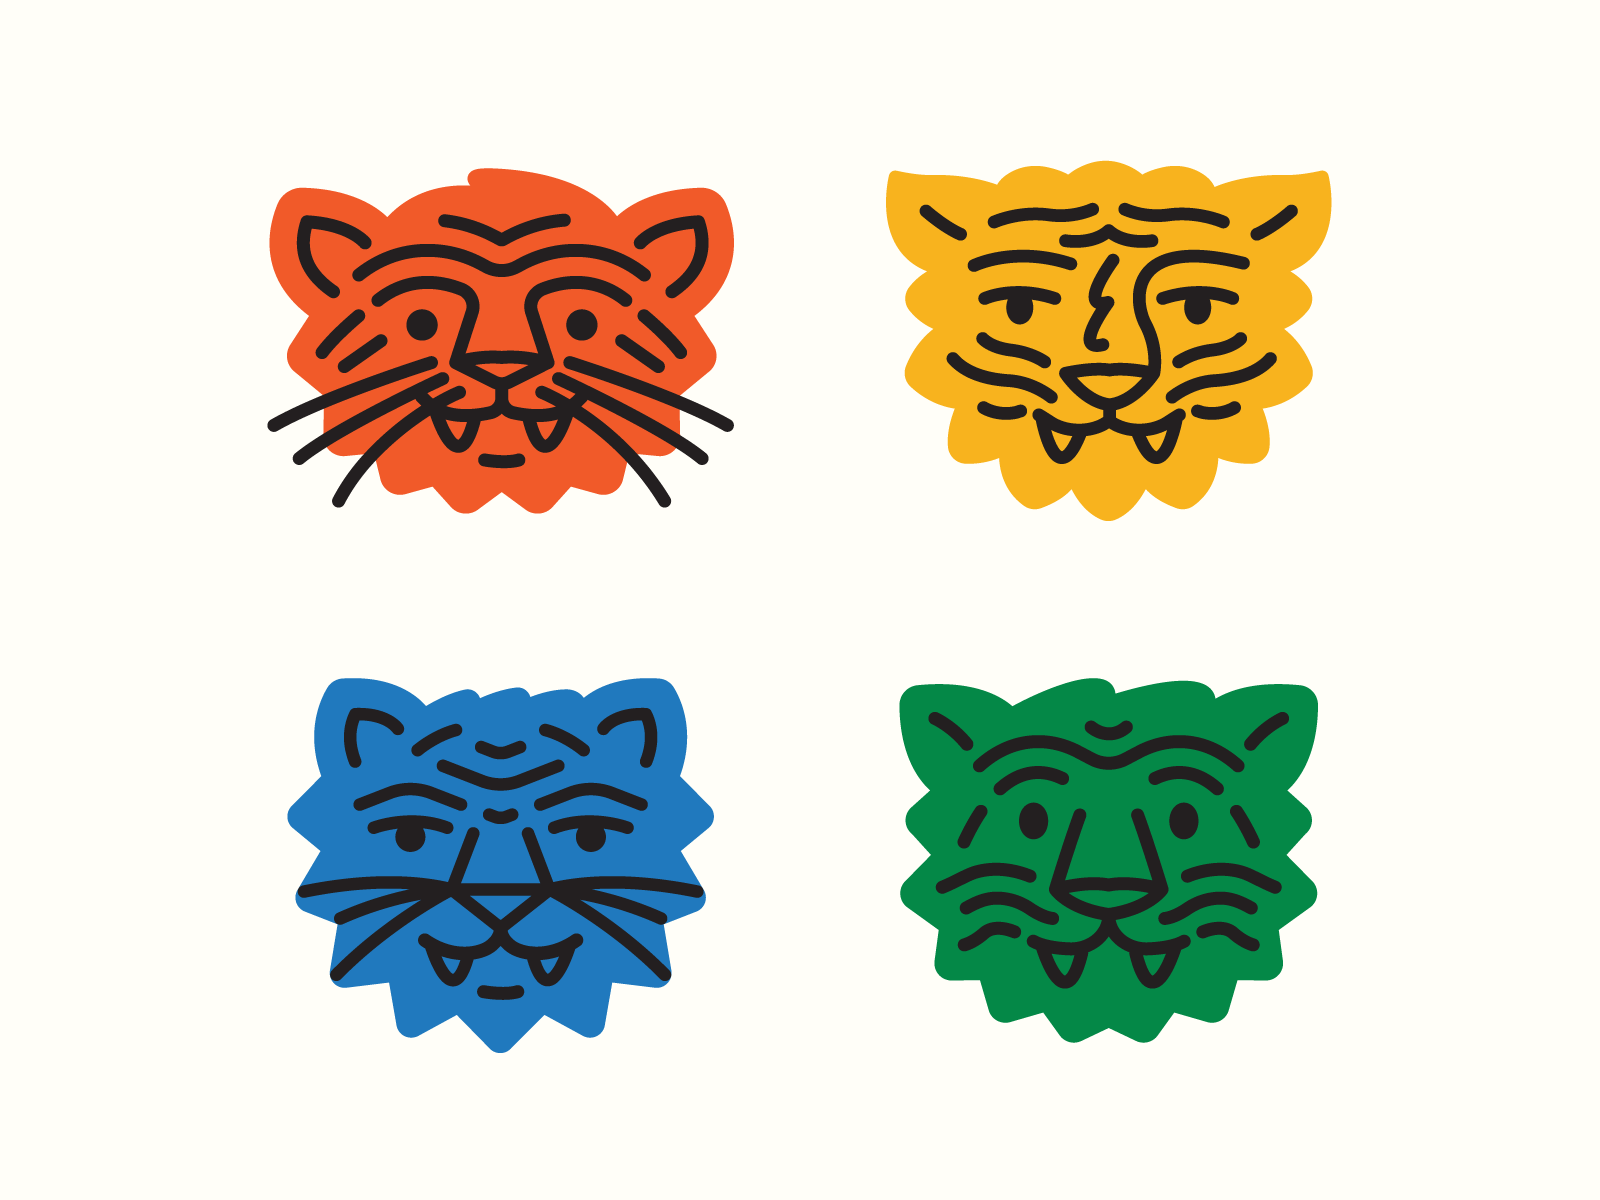 NATURE STICKERS by Damian Orellana on Dribbble